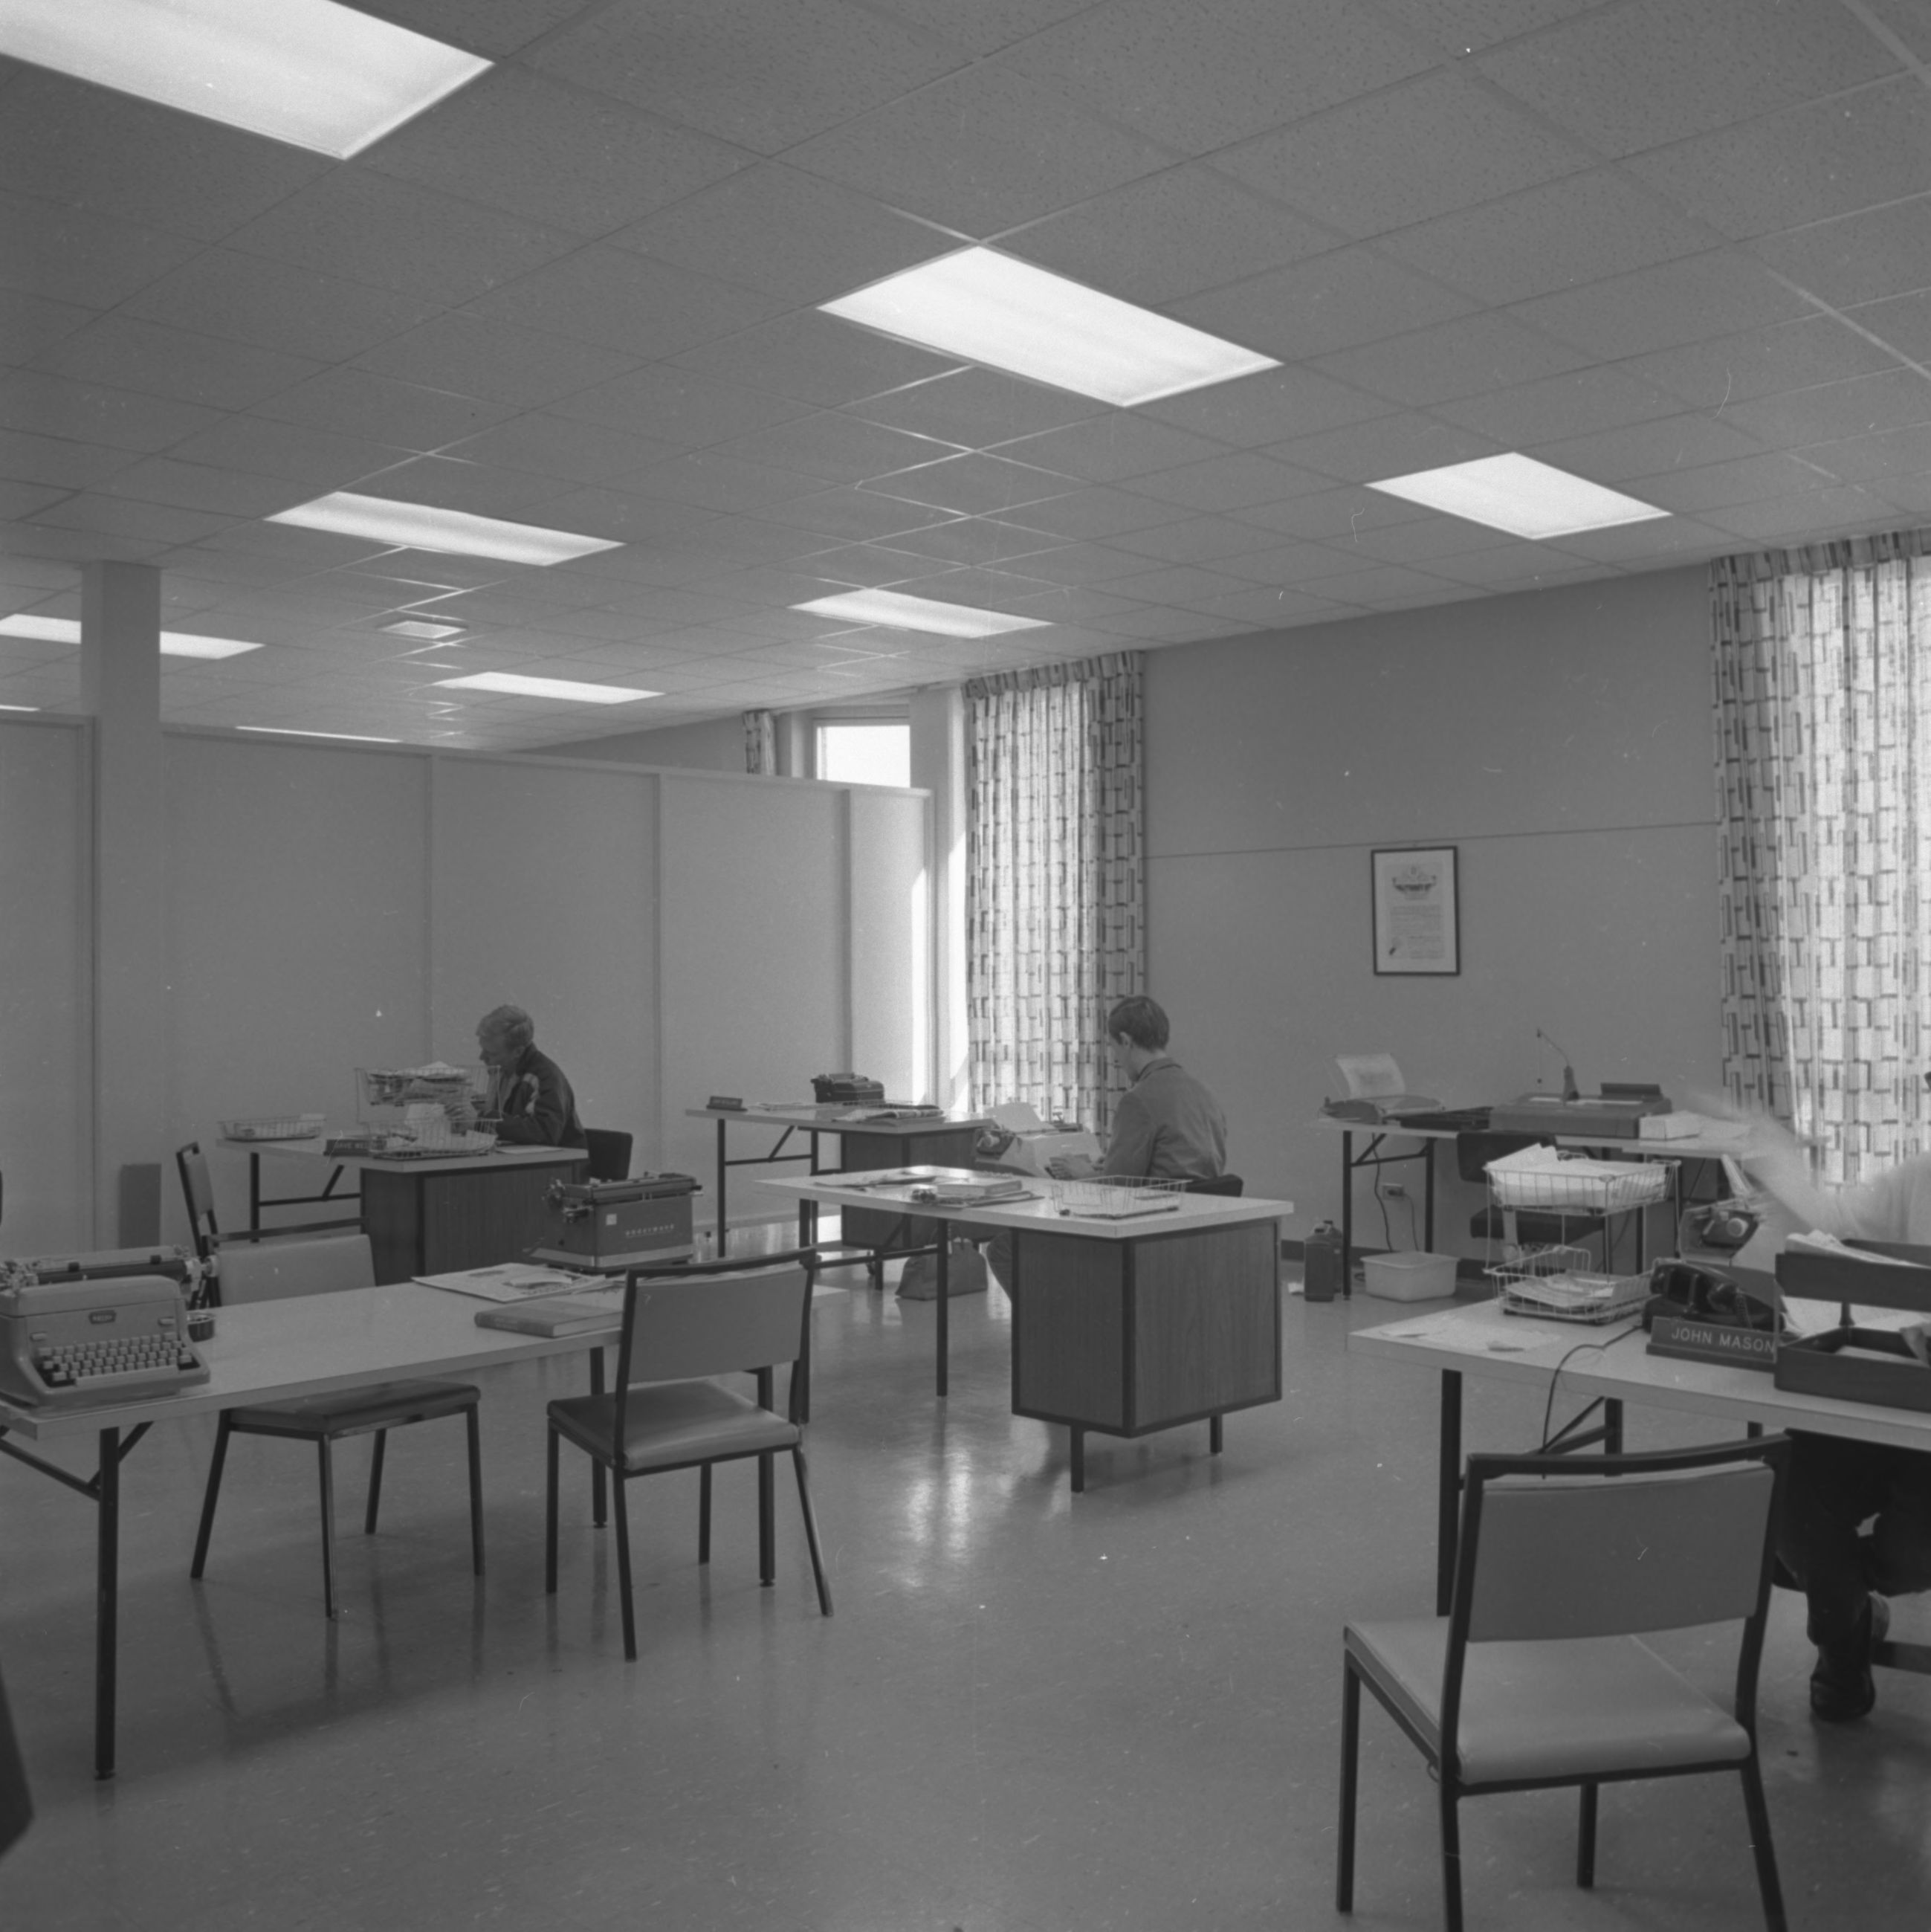 A workroom in the College Center, later renamed the University Center